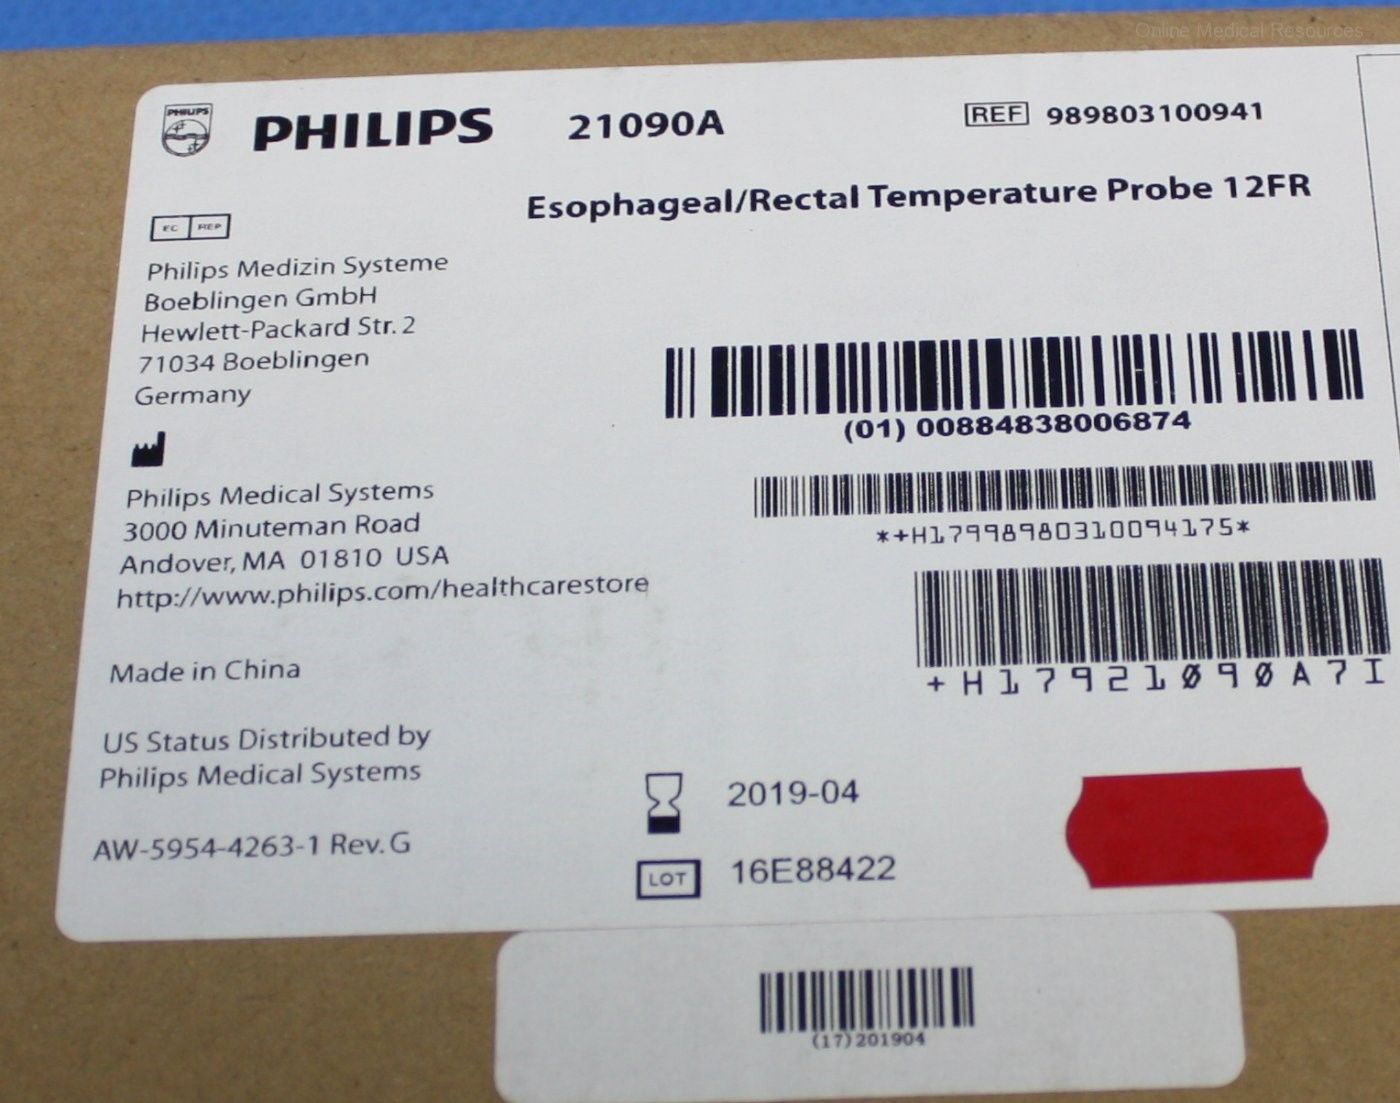 Philips 20 each Esophageal Rectal Temperature Probe 21090A Series 400 2019-04 DIAGNOSTIC ULTRASOUND MACHINES FOR SALE